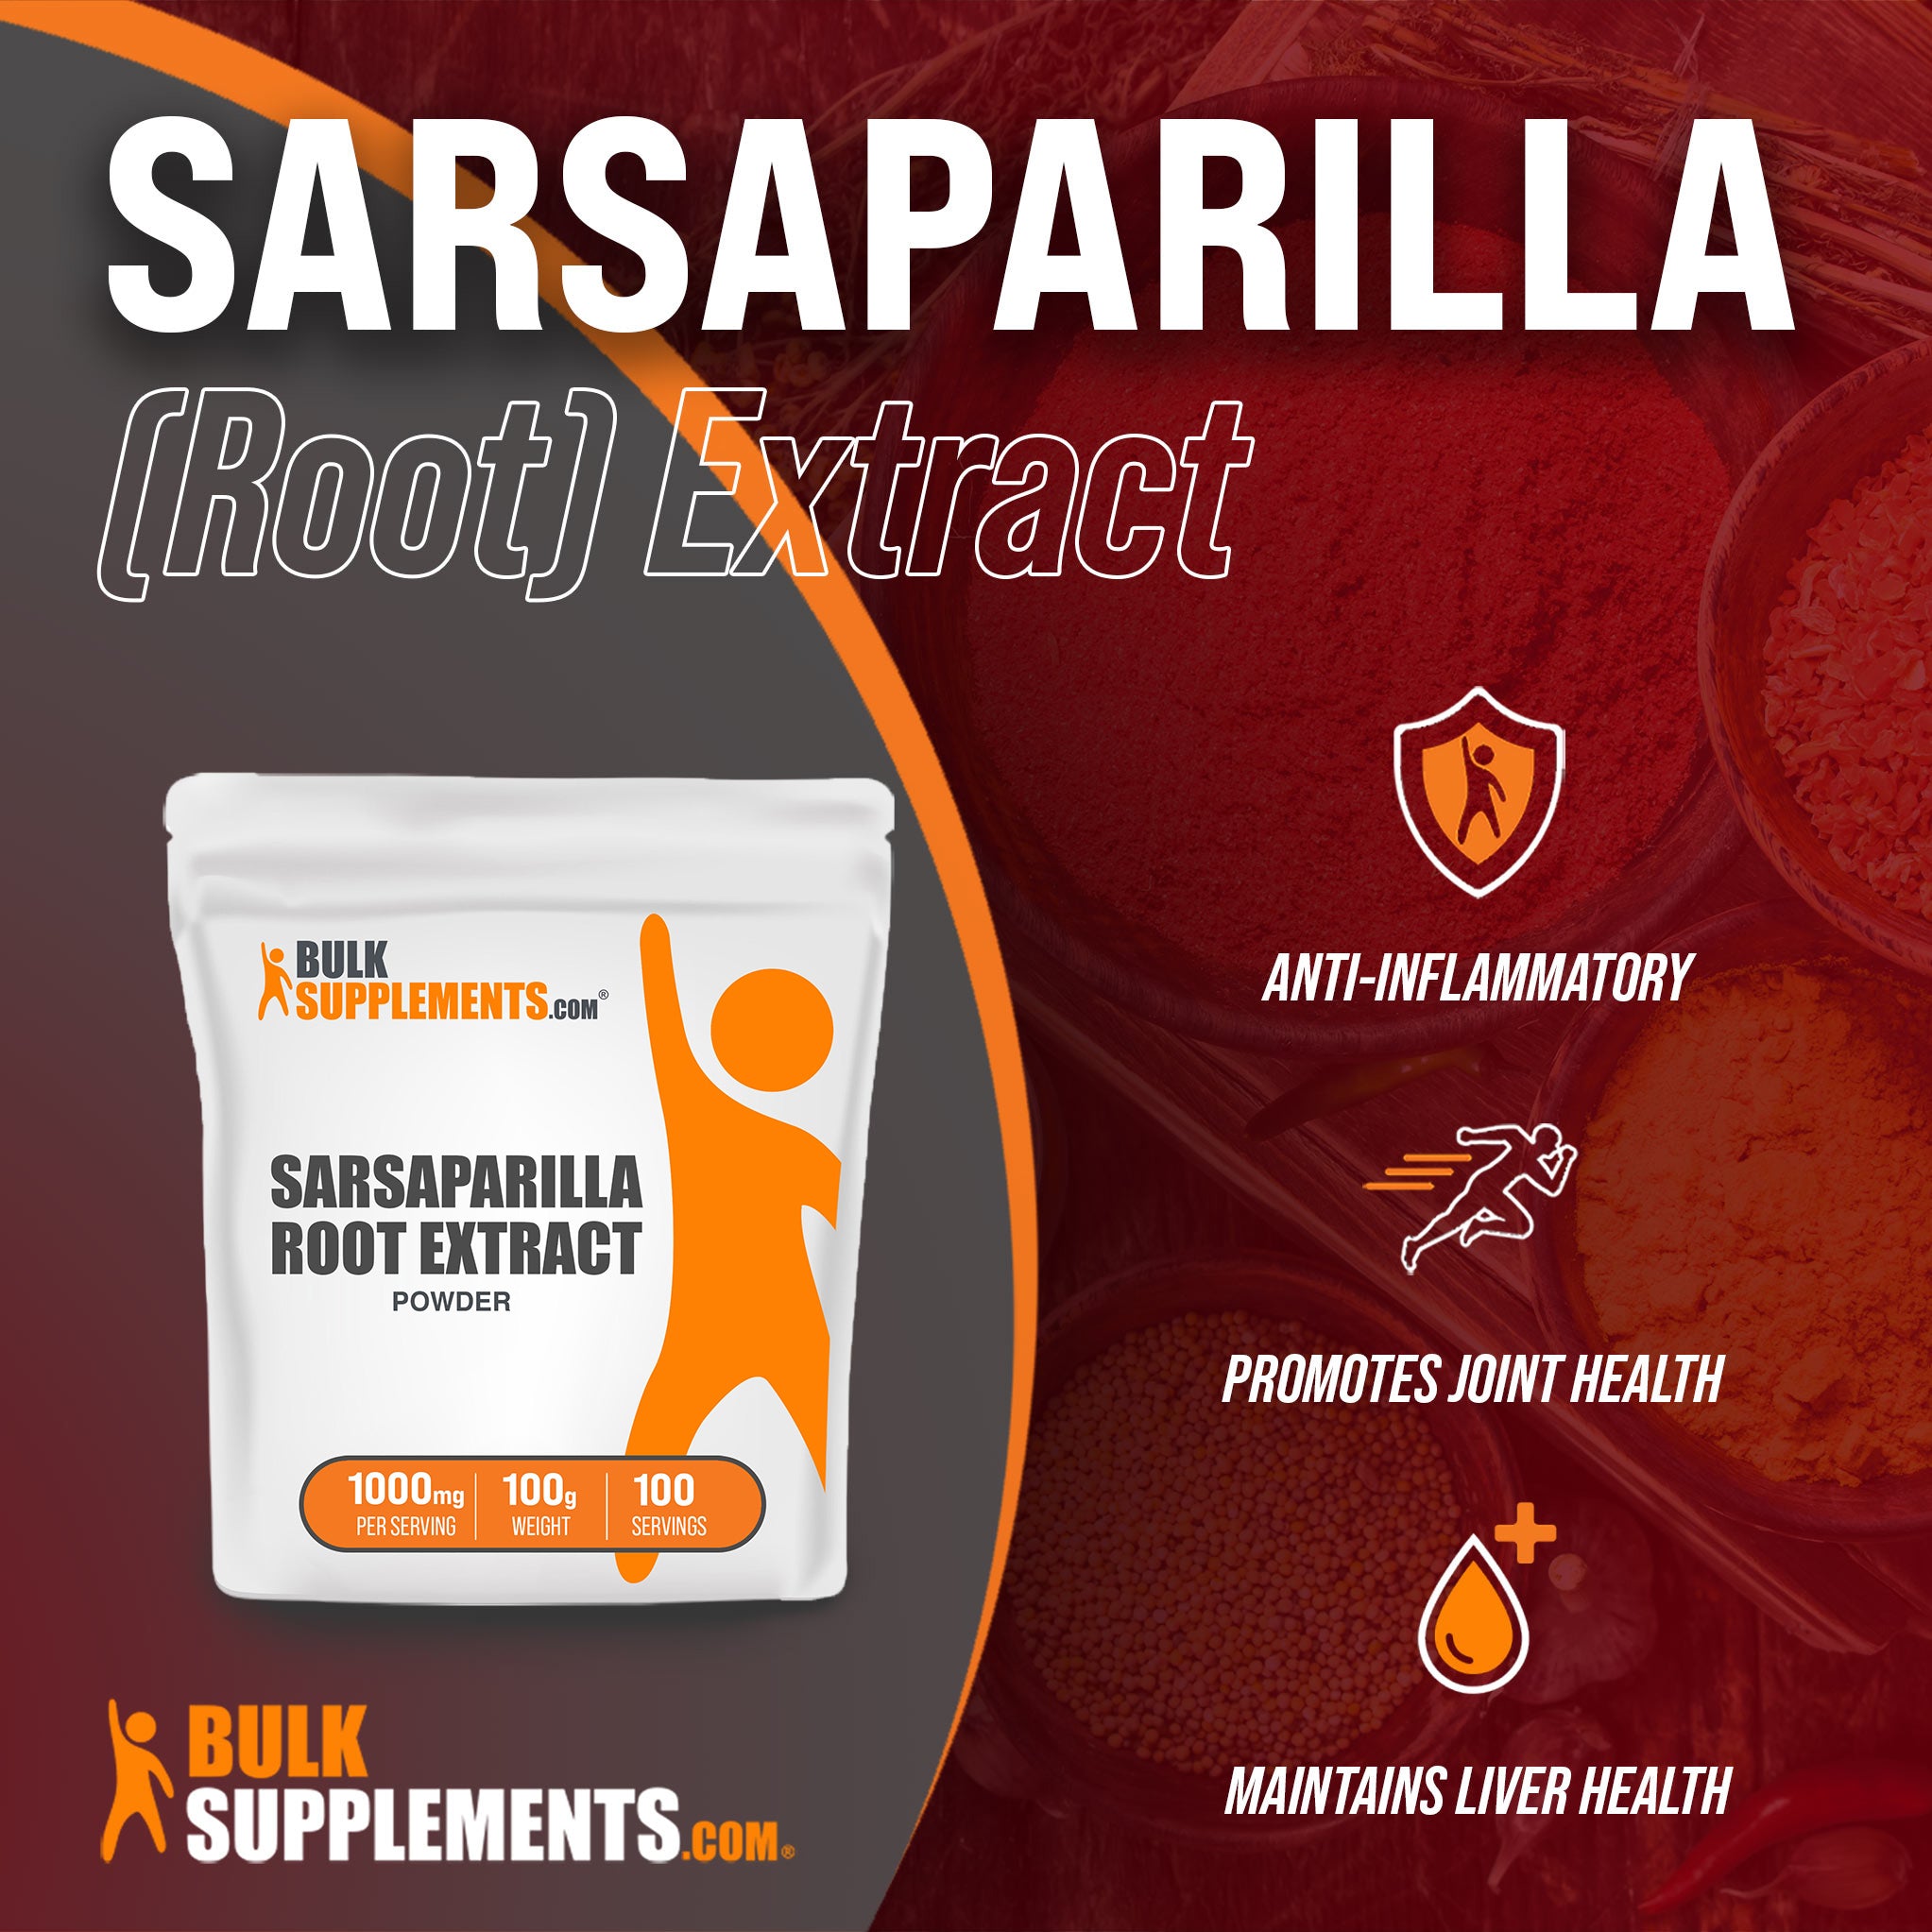 Benefits of Sarsaparilla Root Extract: anti-inflammatory, promotes joint health, maintains liver health